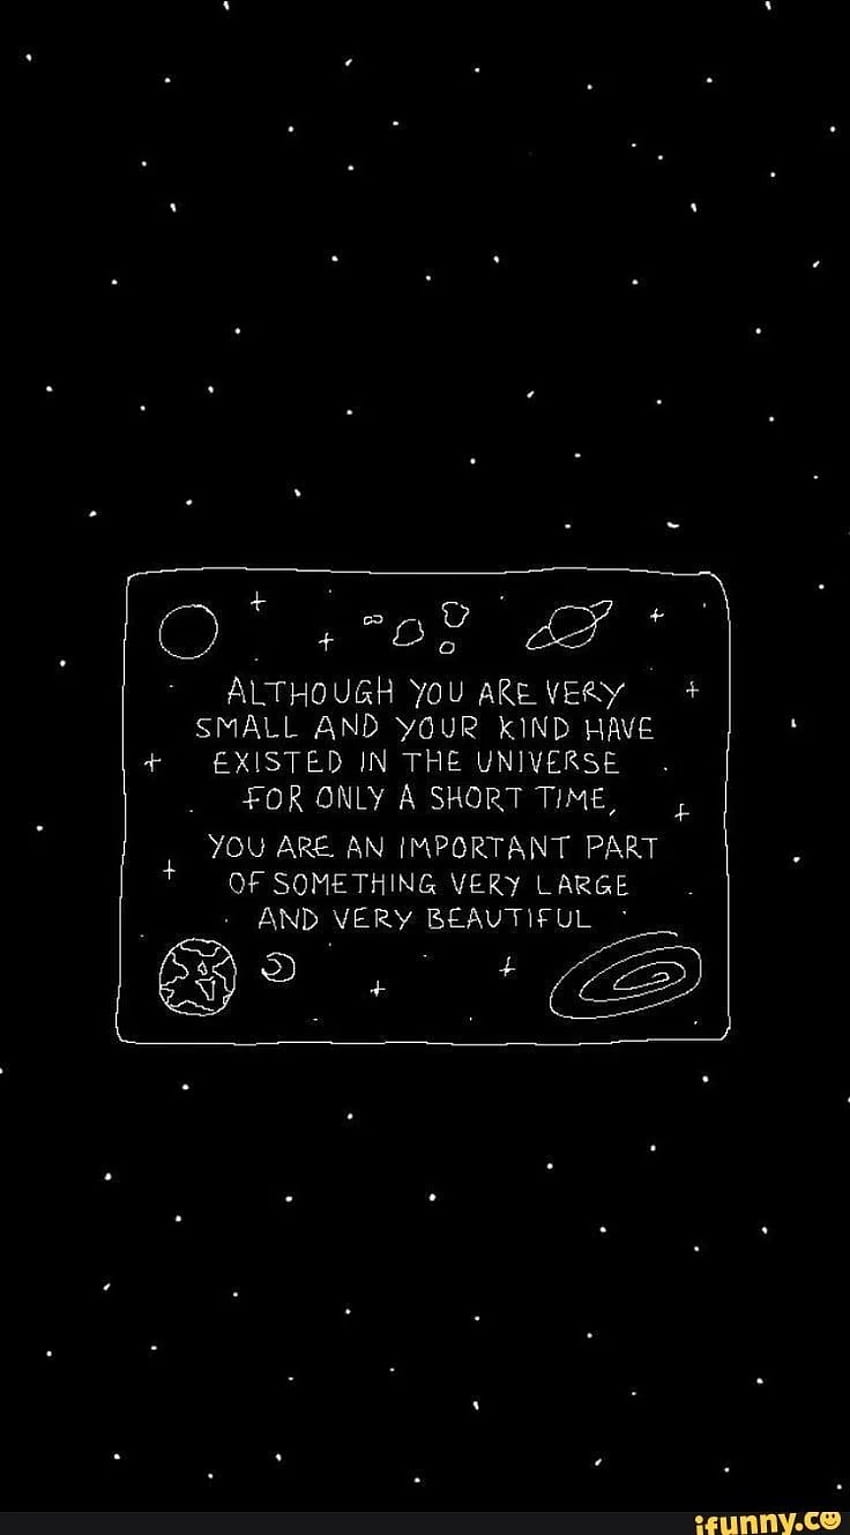 ARE AN IMPORTANT PART OF SOMETHING VEK'I LARGE + EXLSTED JN THE UNIVERSE  YOU - iFunny :). Galaxy quotes, quotes, Best love quotes HD phone wallpaper  | Pxfuel